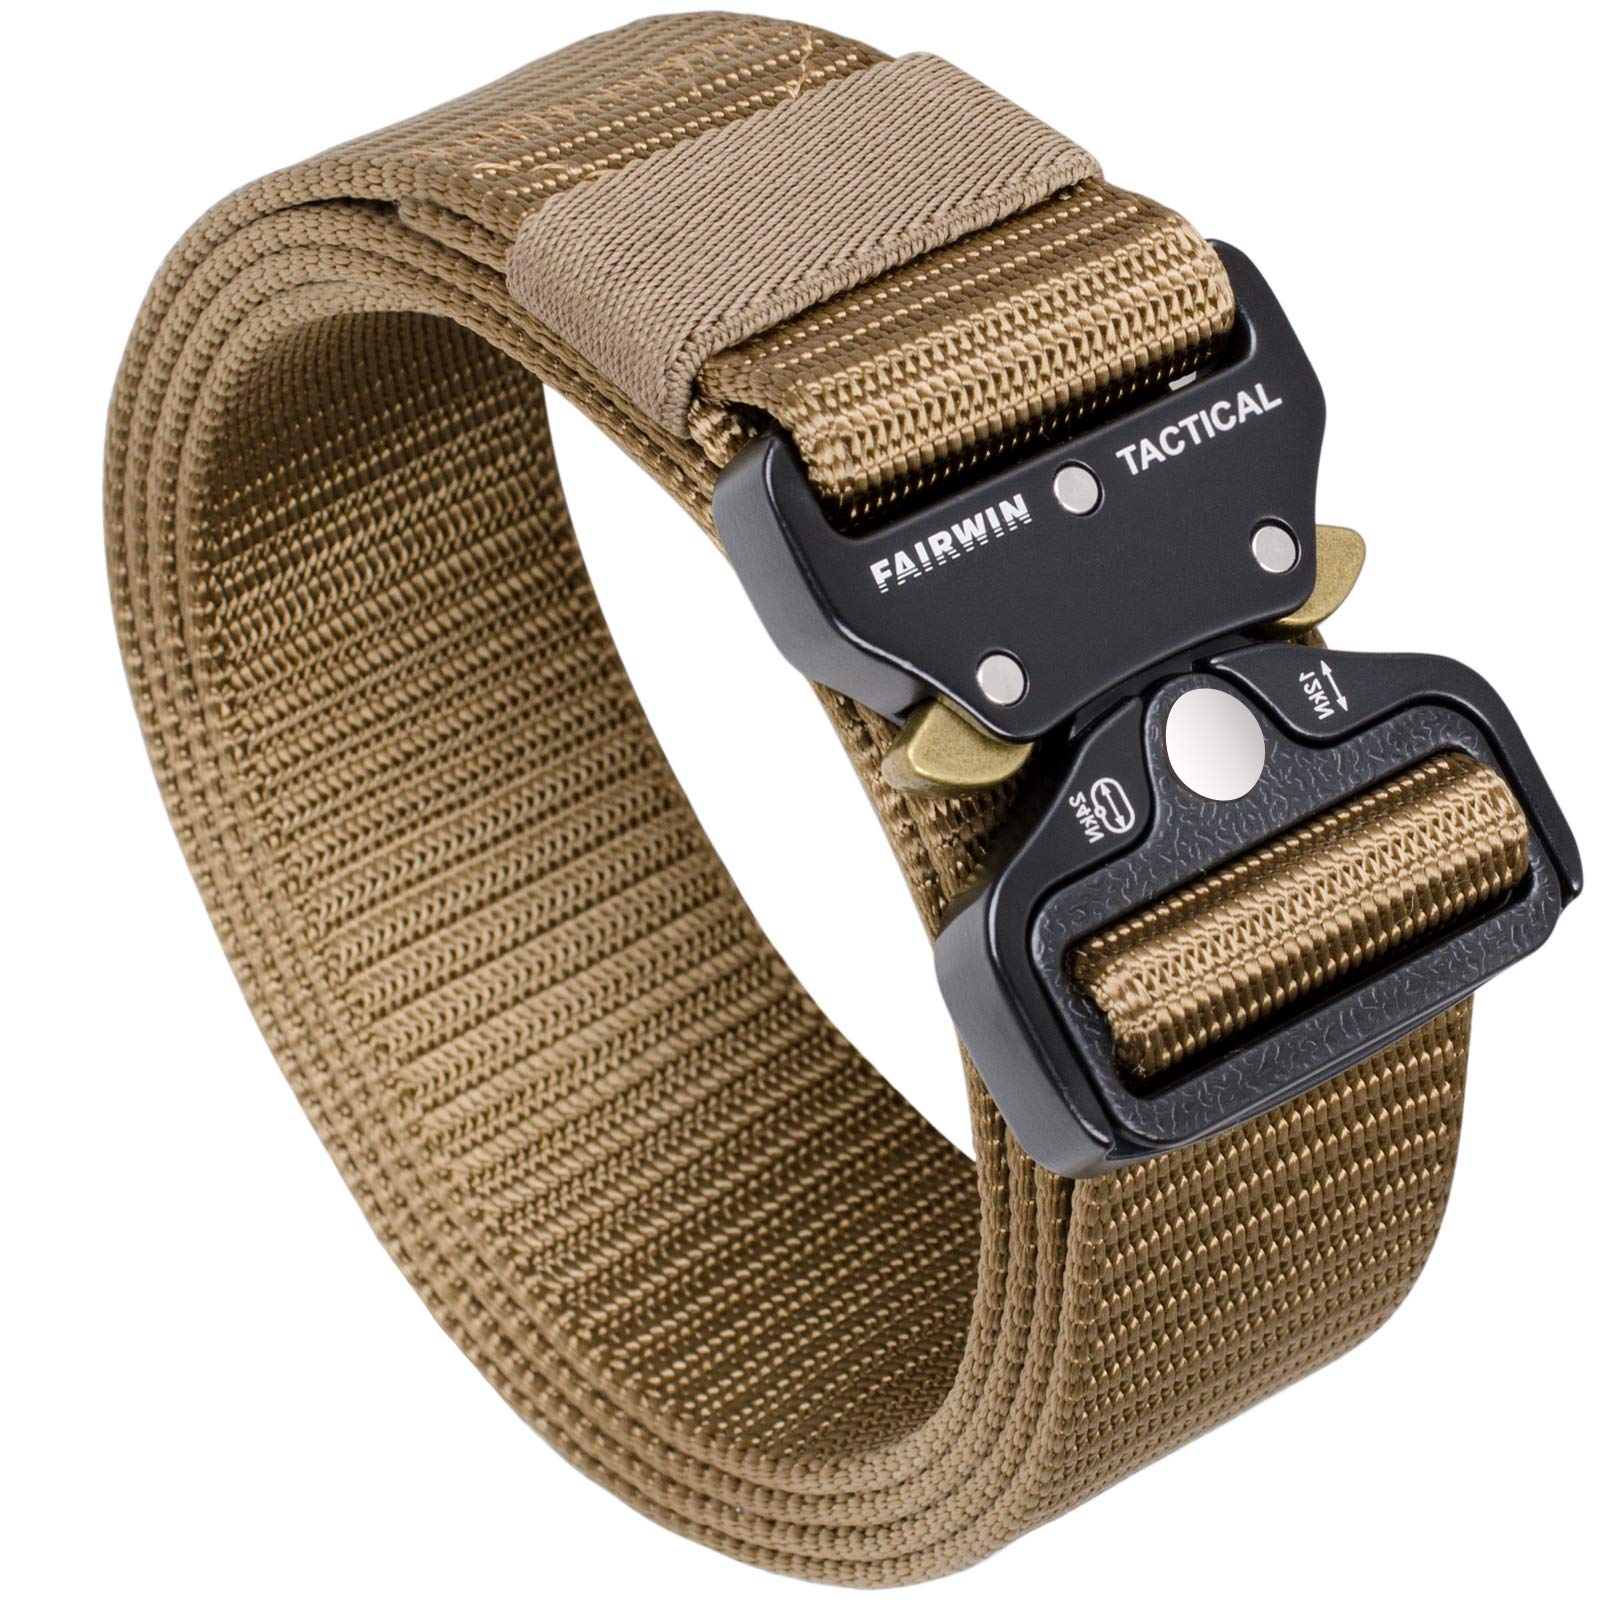 Fairwin Tactical Belt, Military Style Webbing Riggers Web Belt With Heavy-Duty Quick-Release Metal Buckle ( 30-36, Tan)